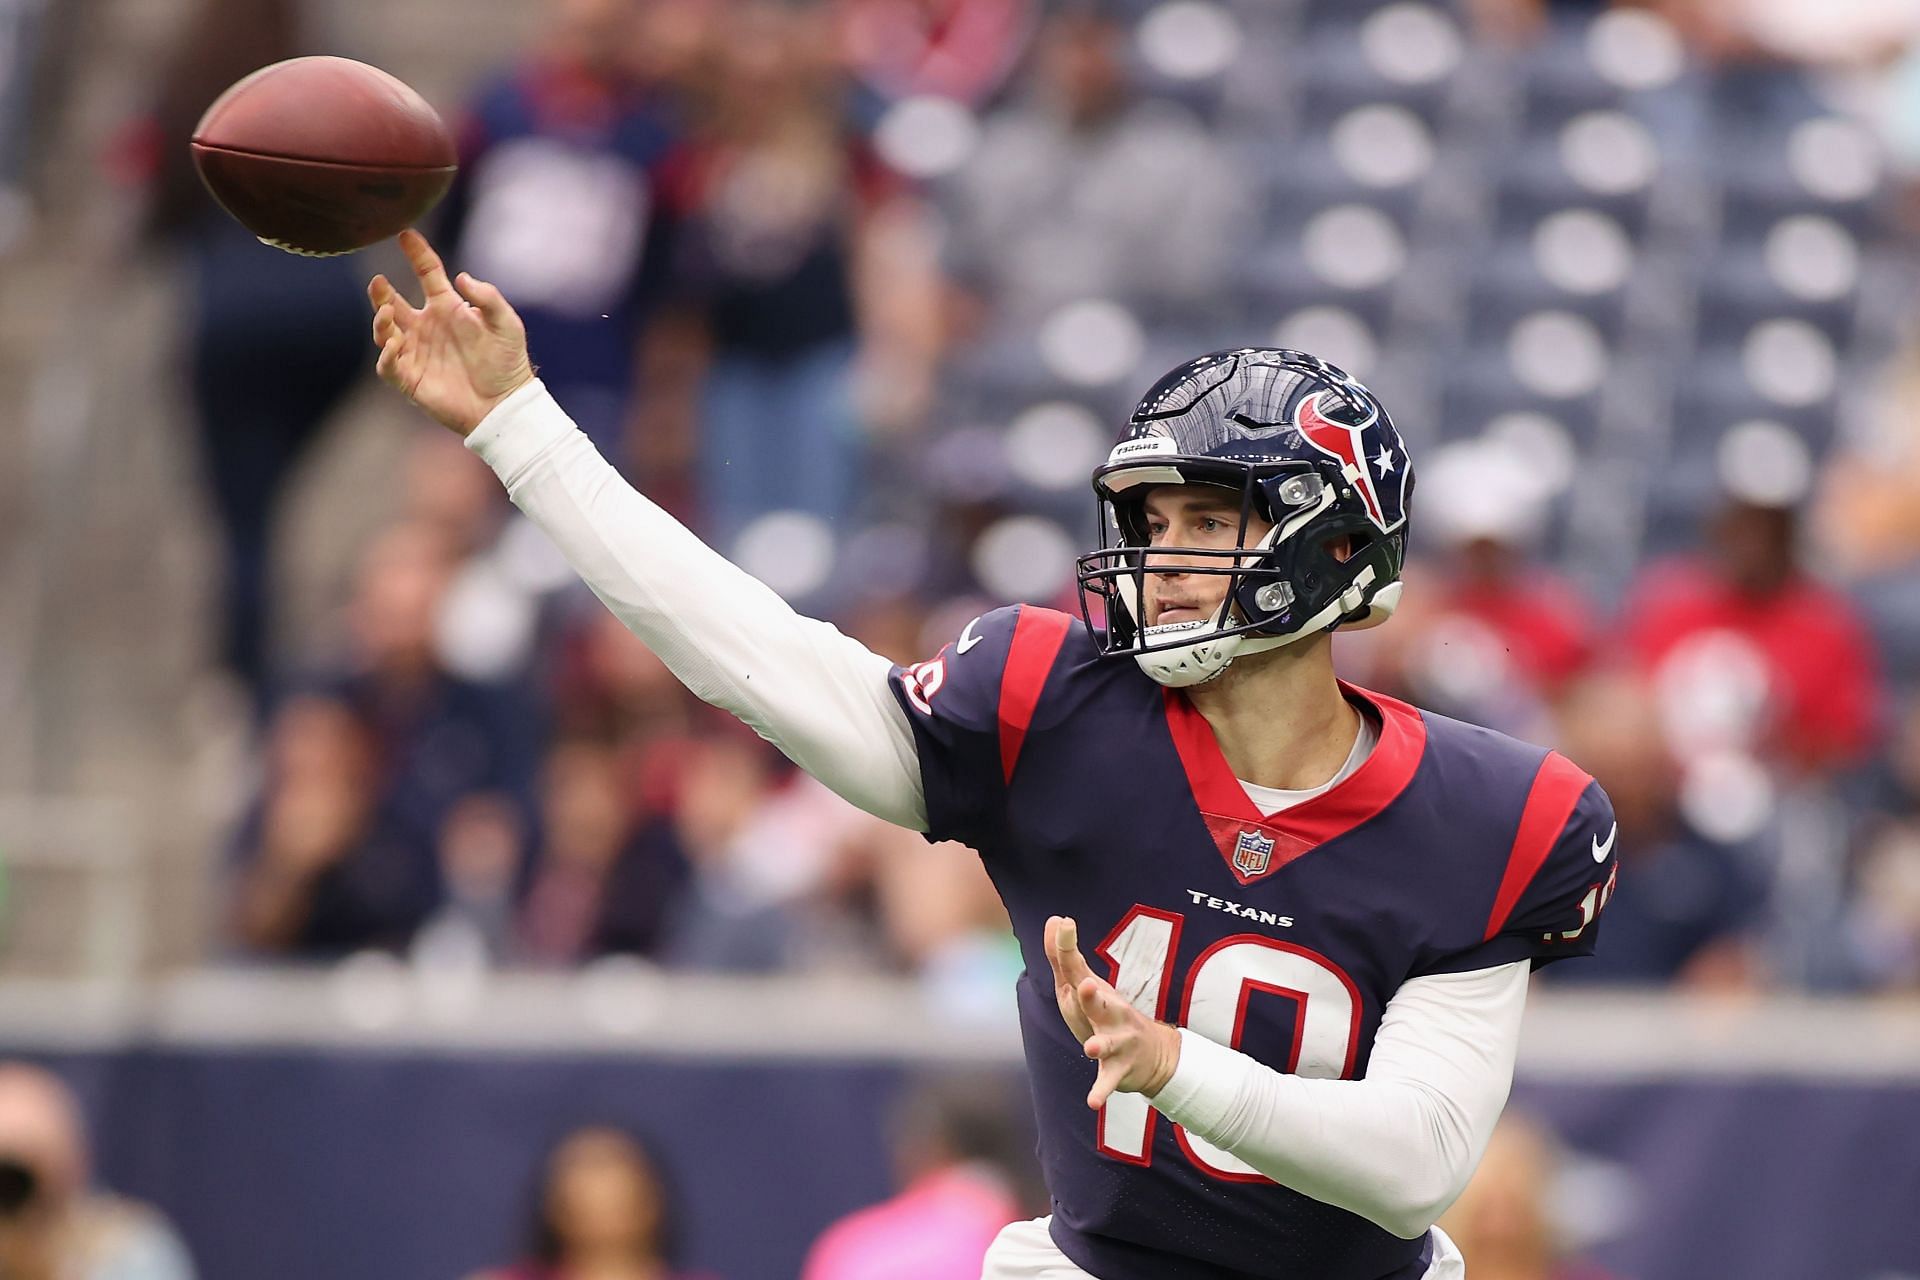 Davis Mills was respectable, but the Texans will likely seek some outside help for next season (Photo: Getty)